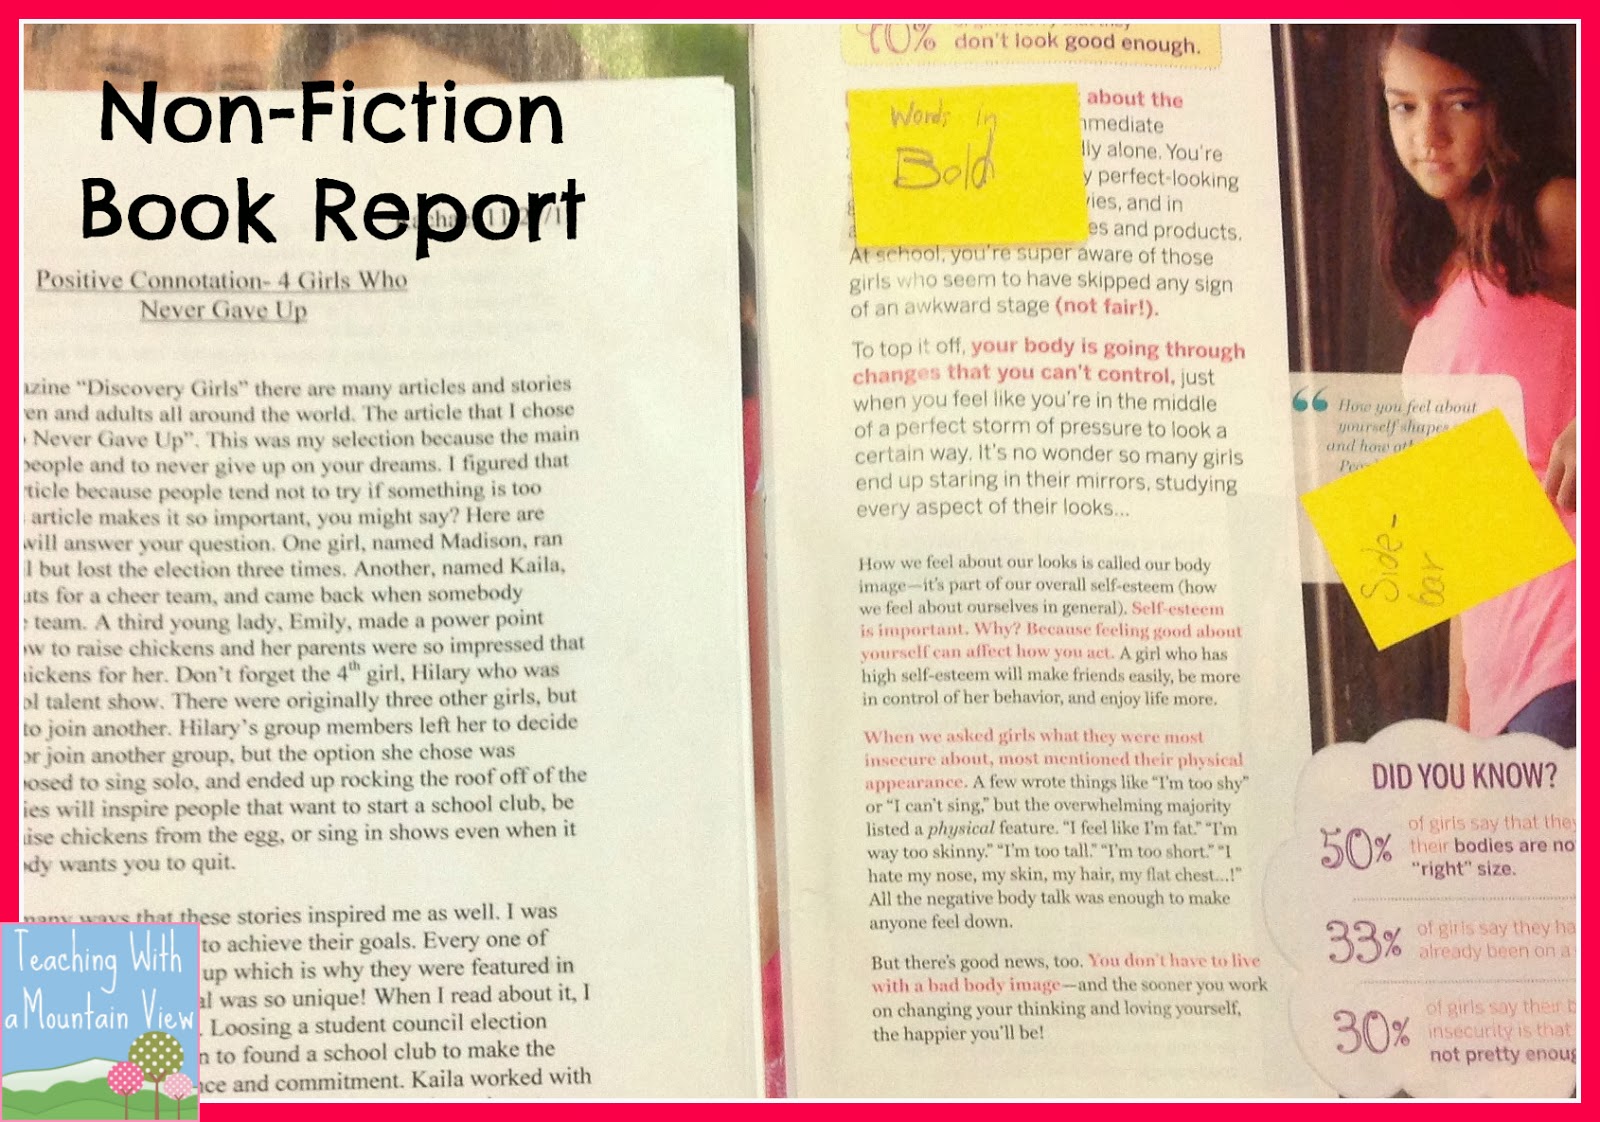 Nonfiction book report ideas for middle school